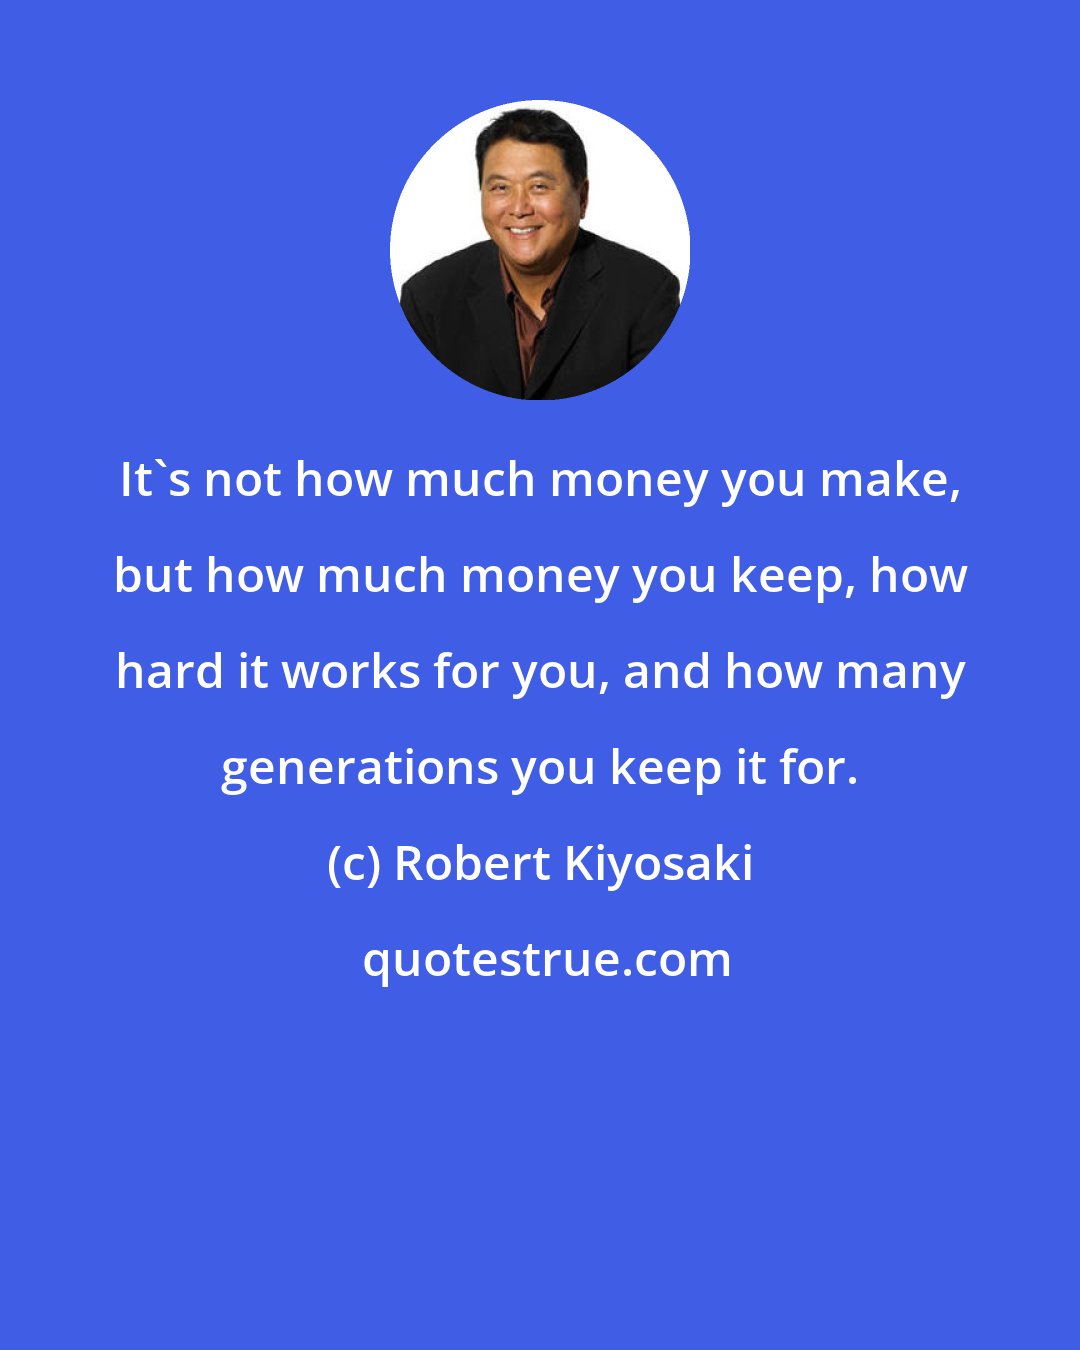 Robert Kiyosaki: It's not how much money you make, but how much money you keep, how hard it works for you, and how many generations you keep it for.